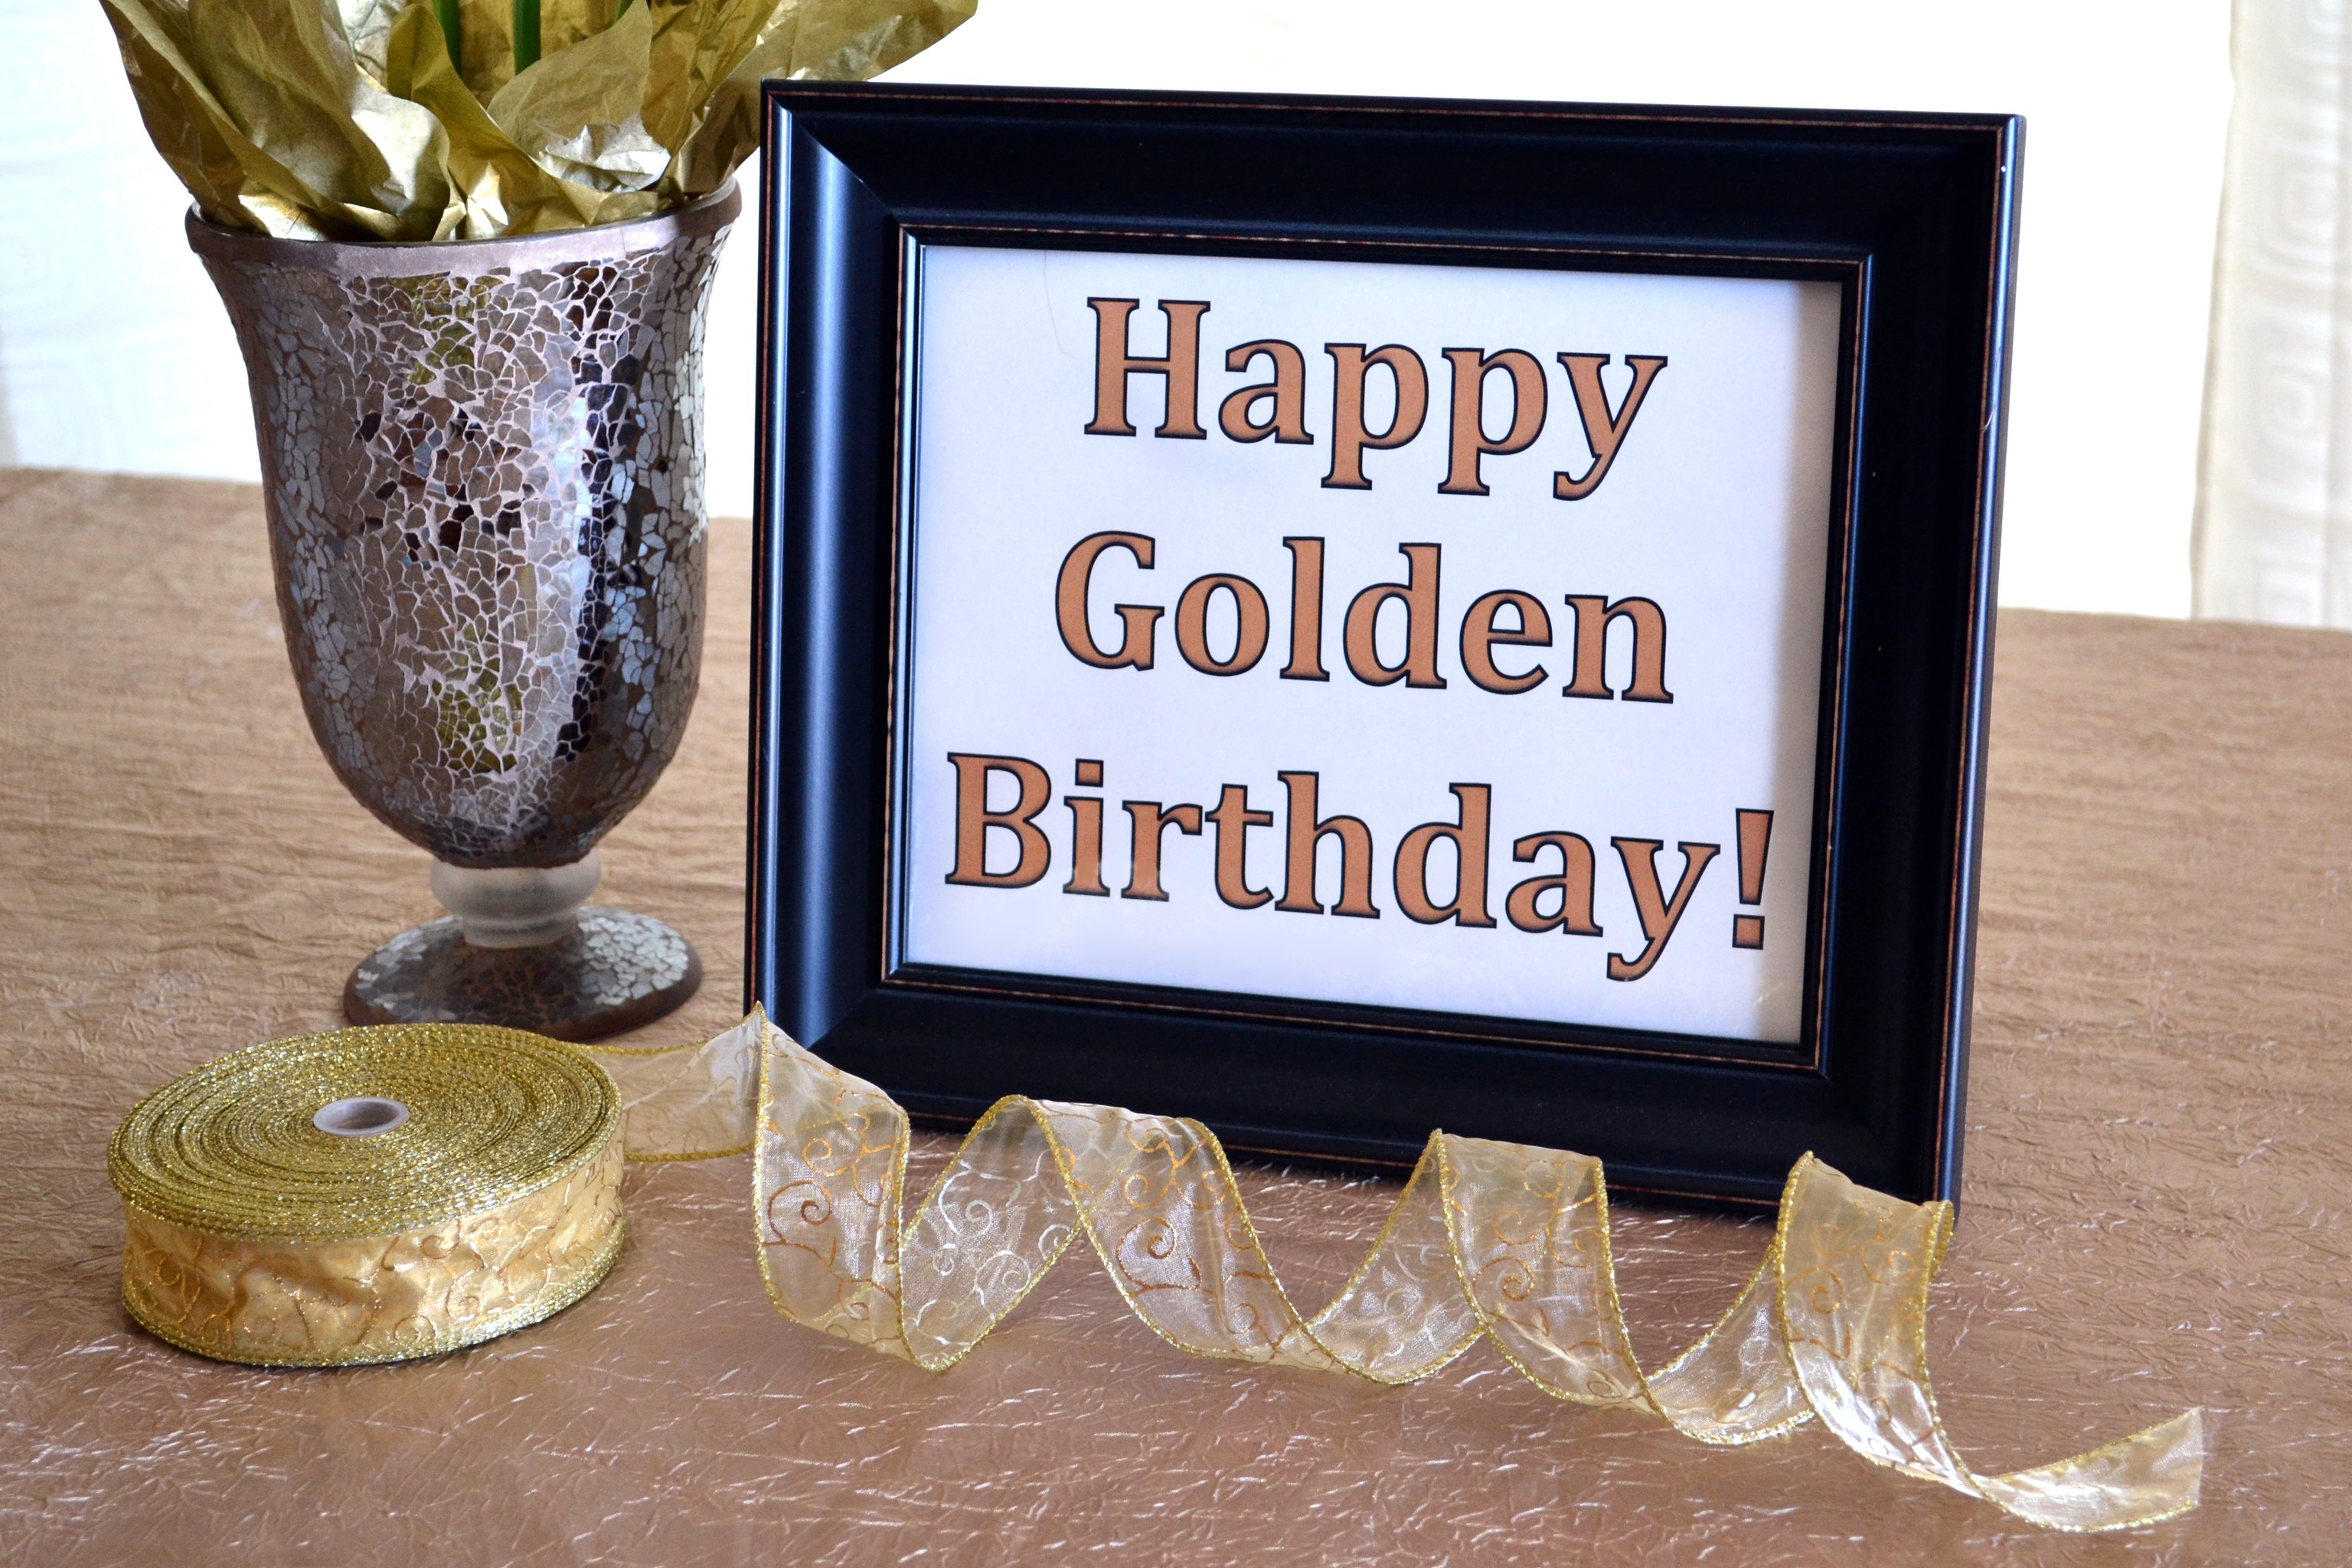  Ideas for a Golden Birthday Party with Pictures eHow